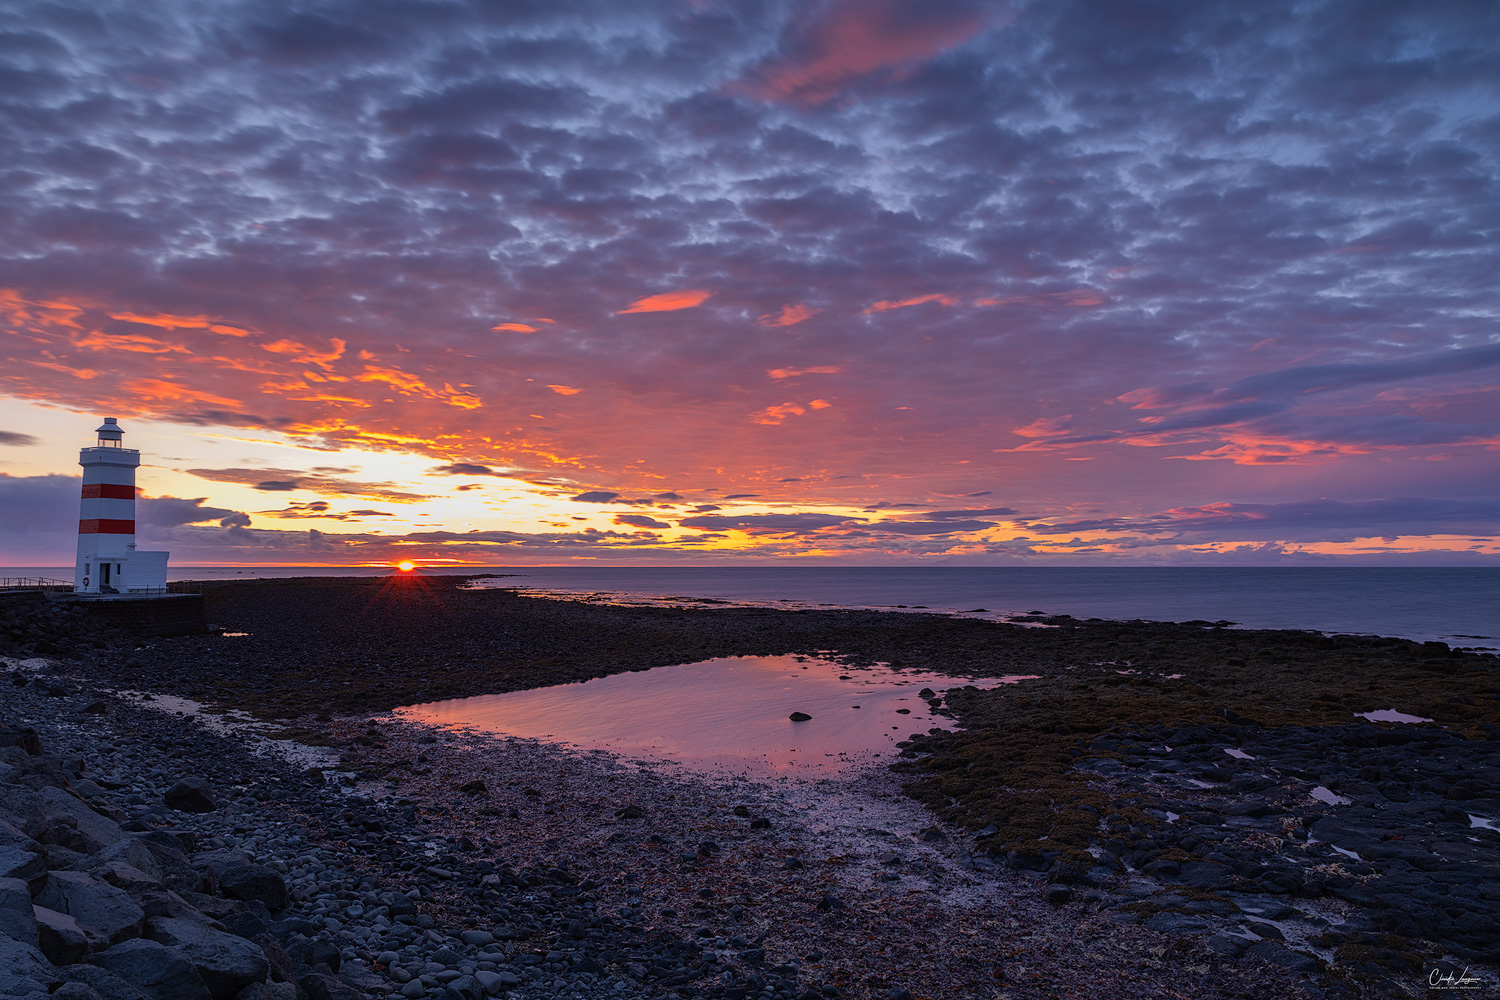 View of Gardur Lighthouse in Iceland at sunset.